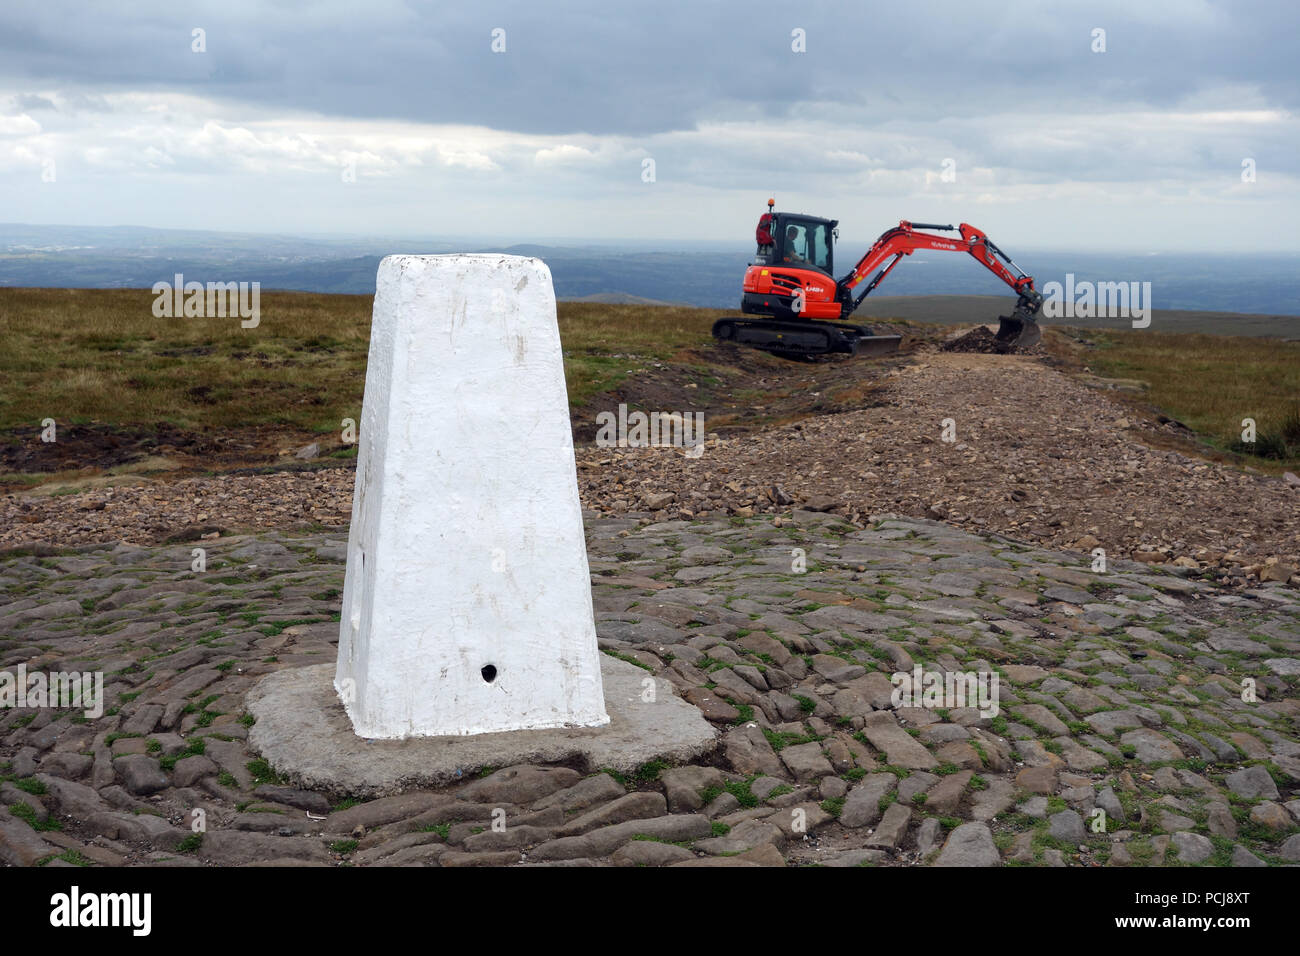 Mechanical Digger Working on the New Path Being Constructed Leading up to the Trig Column on the Summit of Pendle Hill, Lancashire, England, UK Stock Photo